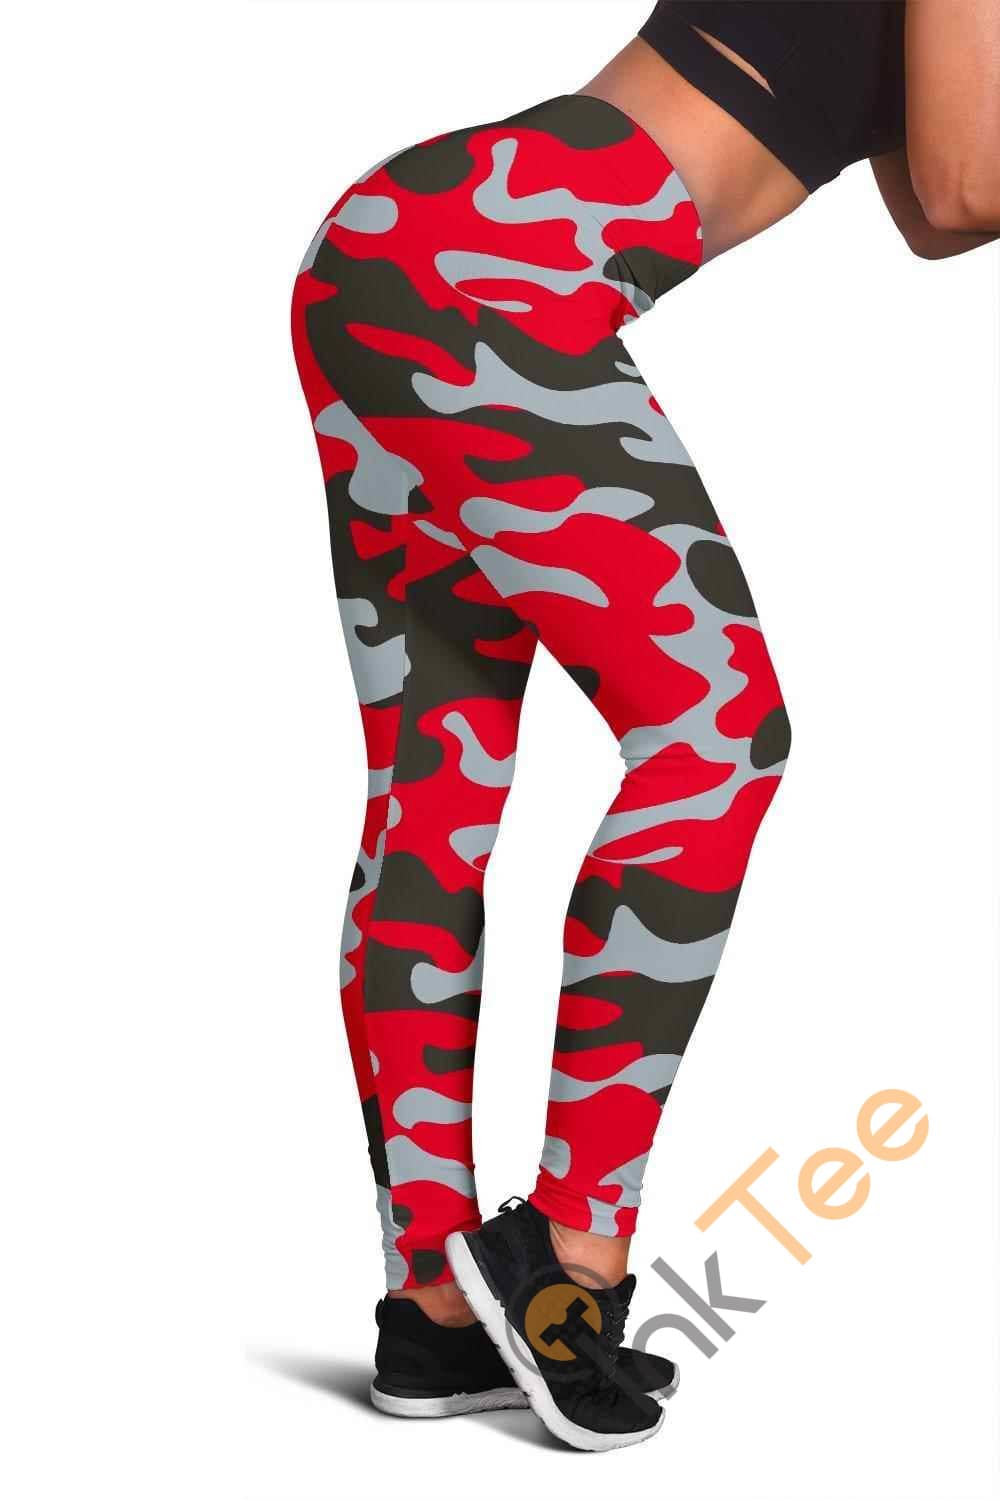 Inktee Store - Tampa Bay Buccaneers Inspired Tru Camo 3D All Over Print For Yoga Fitness Fashion Women'S Leggings Image